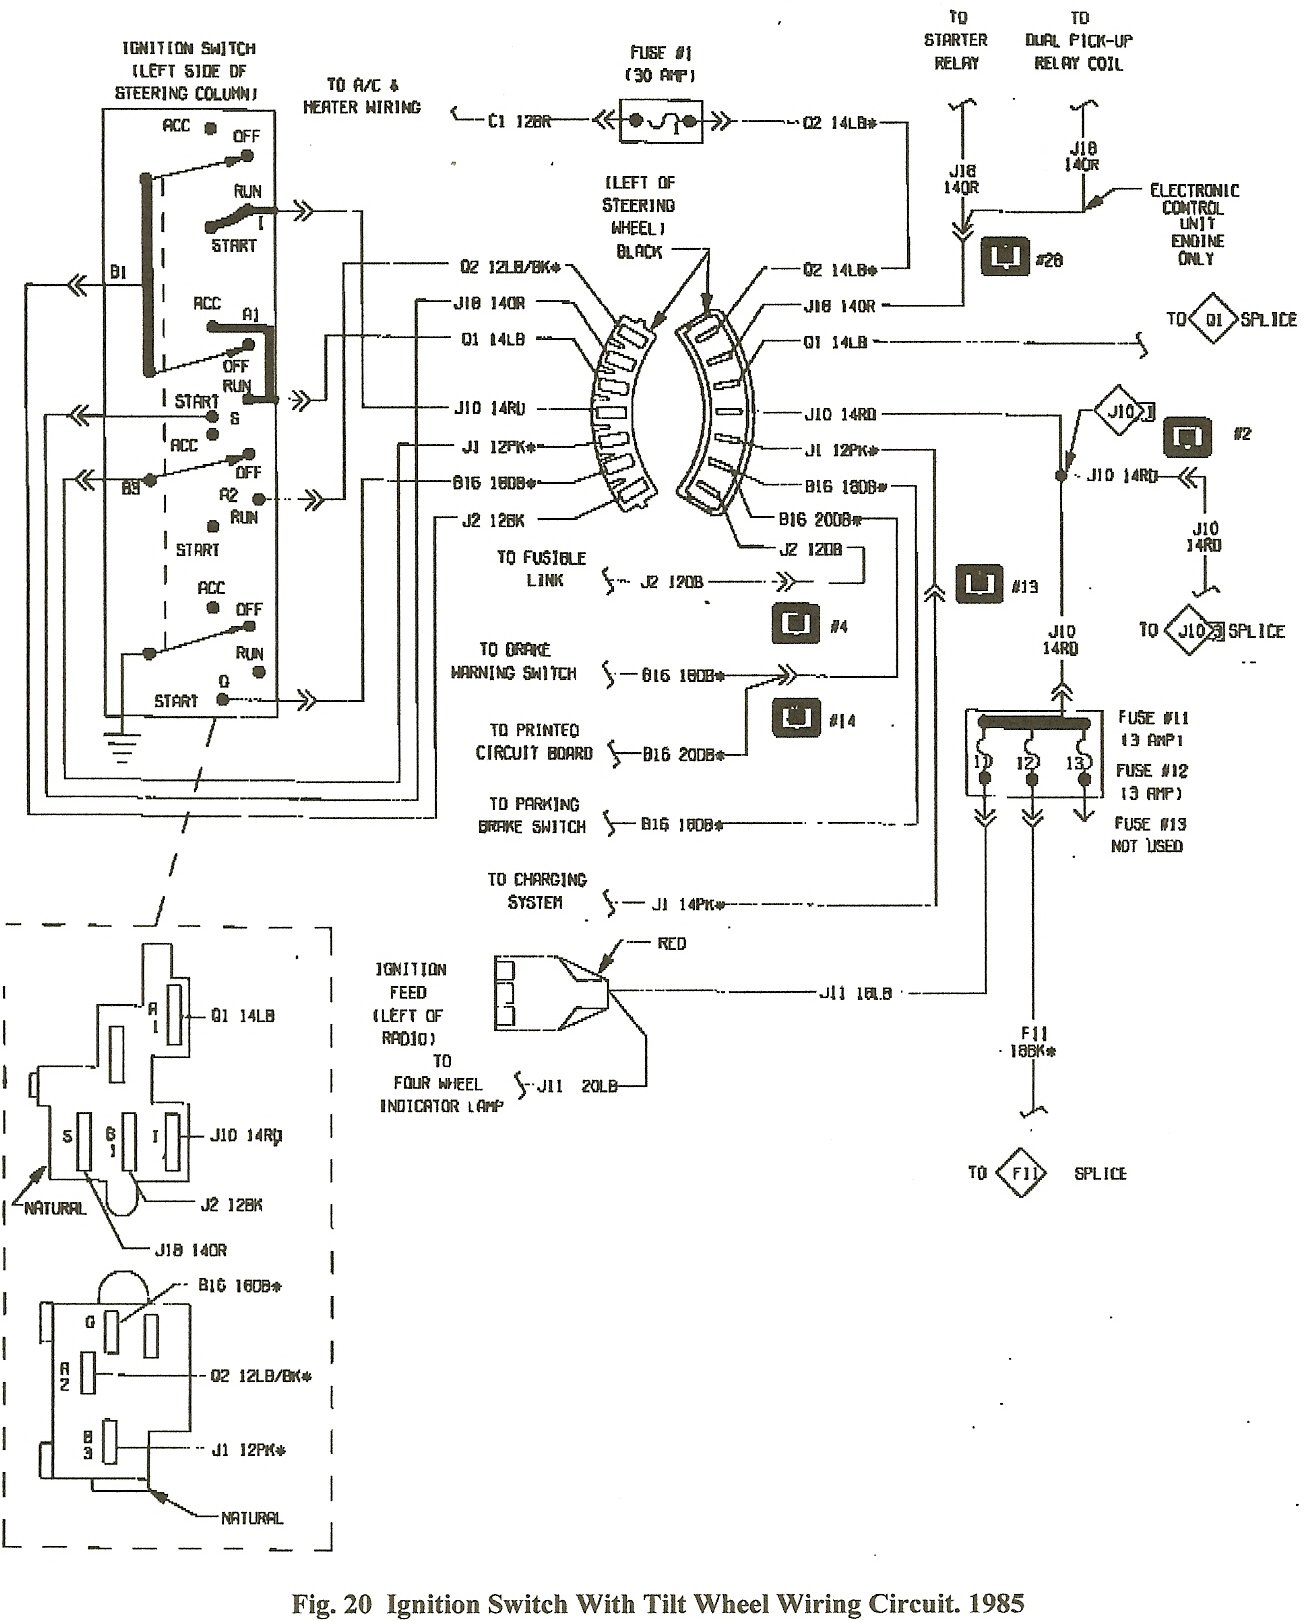 Http www pic2fly 1977 Dodge Ignition Wiring Diagram html Images